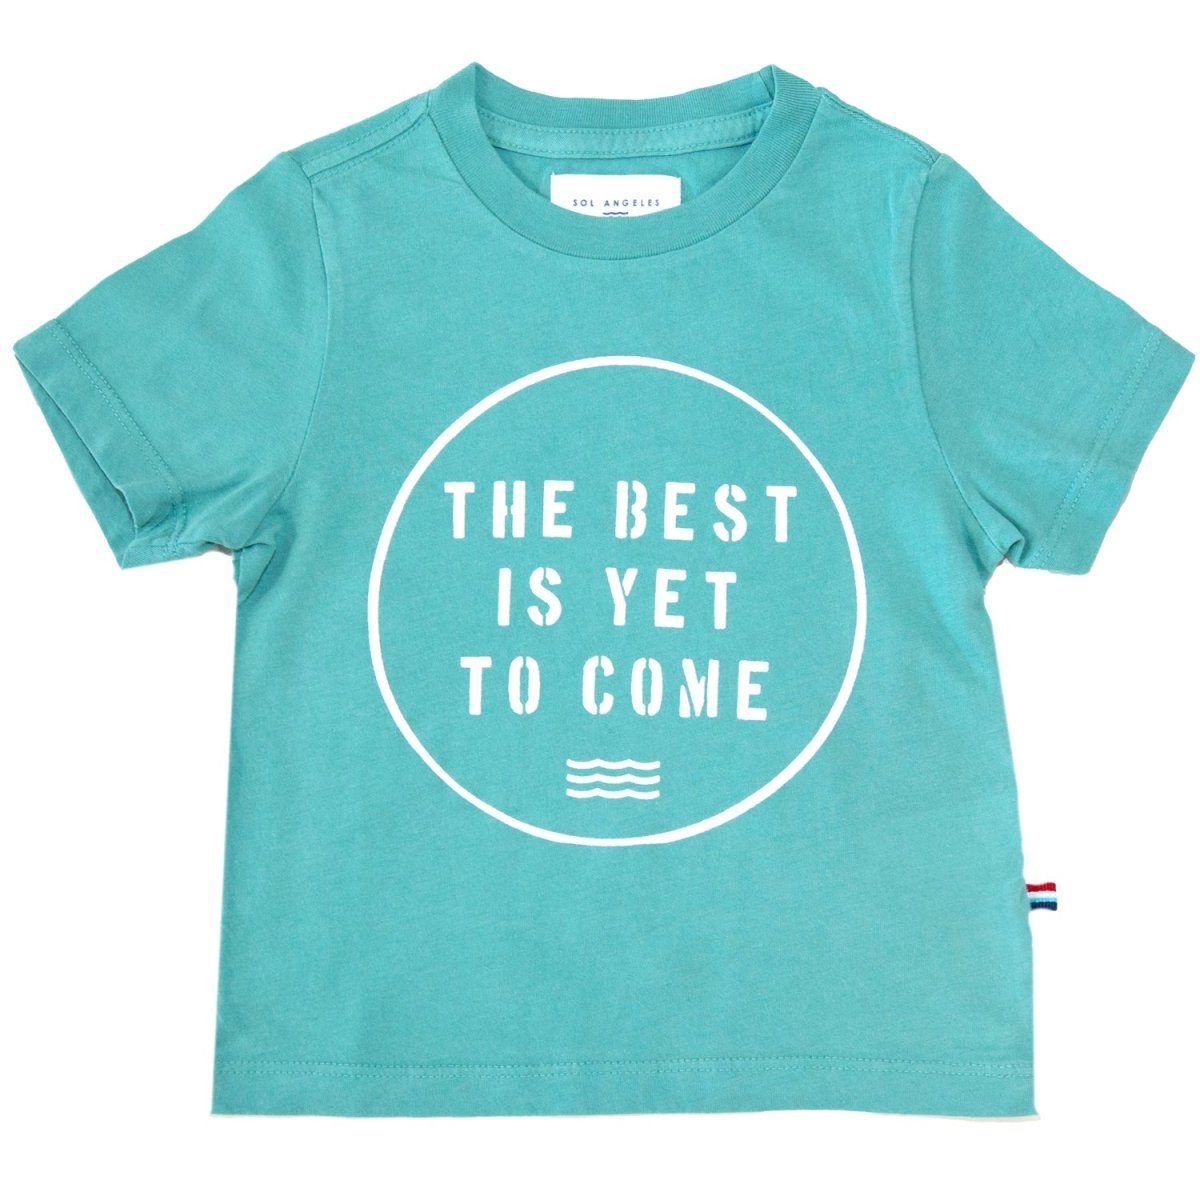 THE BEST IS YET TO COME TSHIRT - SHORT SLEEVE TOPS